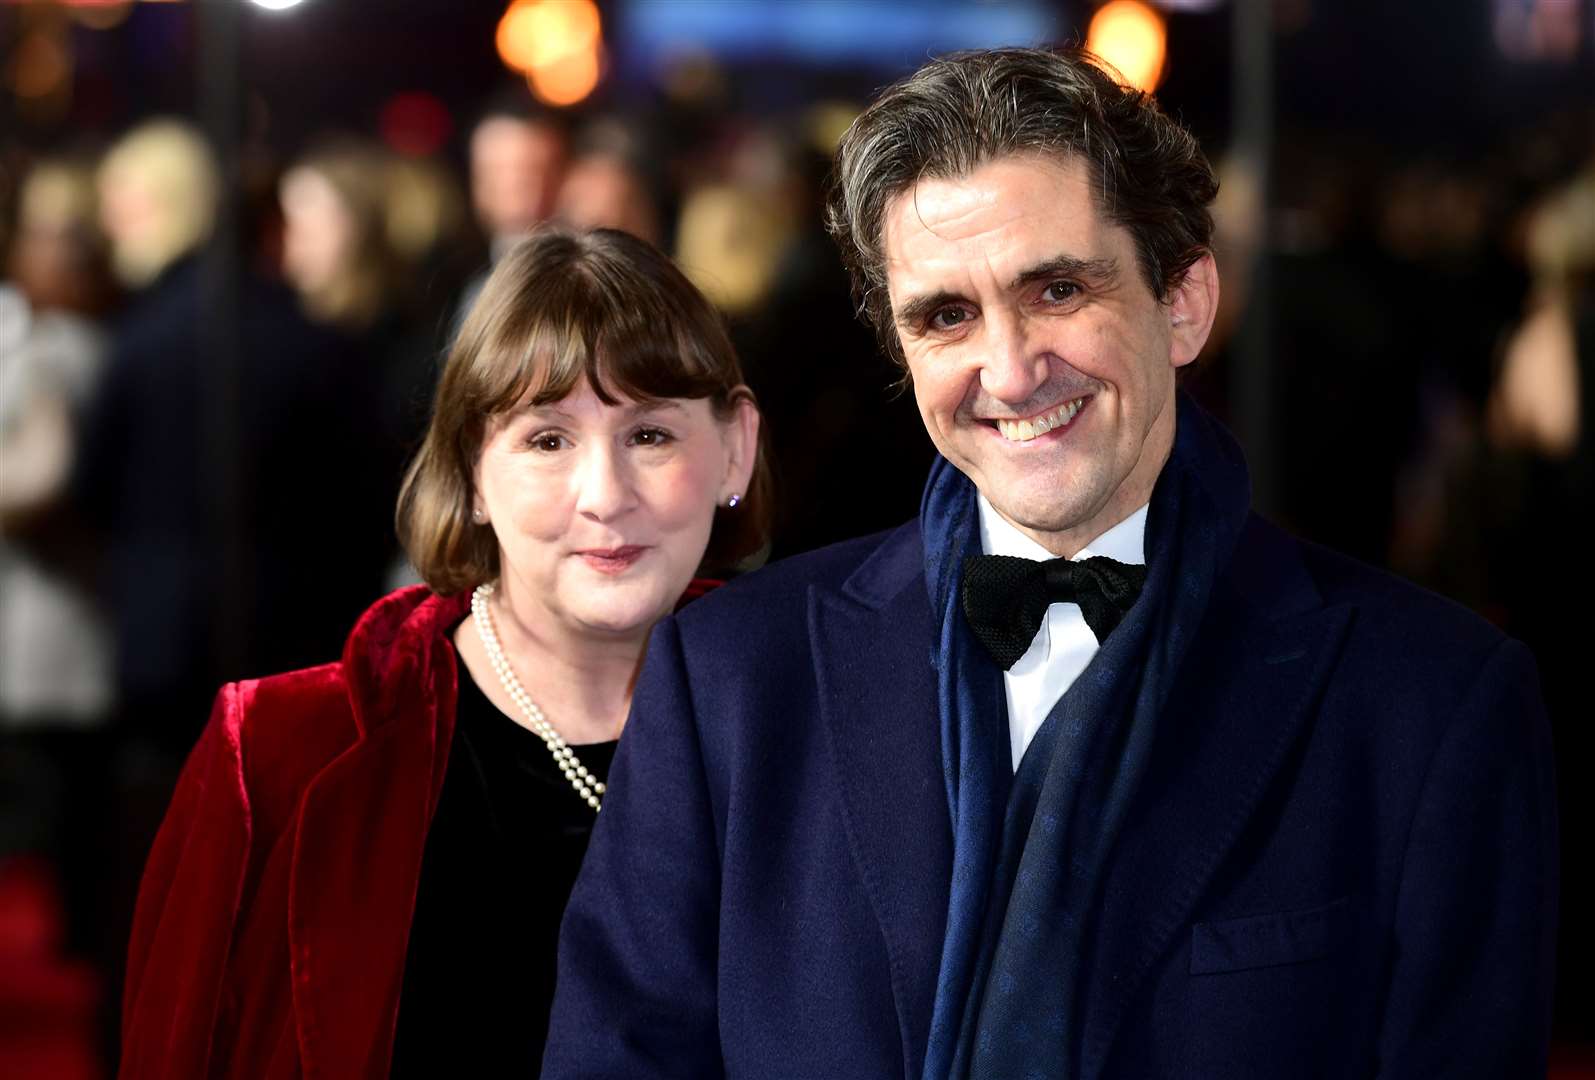 Stephen McGann (right) and Heidi Thomas attending the 1917 World Premiere at Leicester Square, London (Ian West/PA)